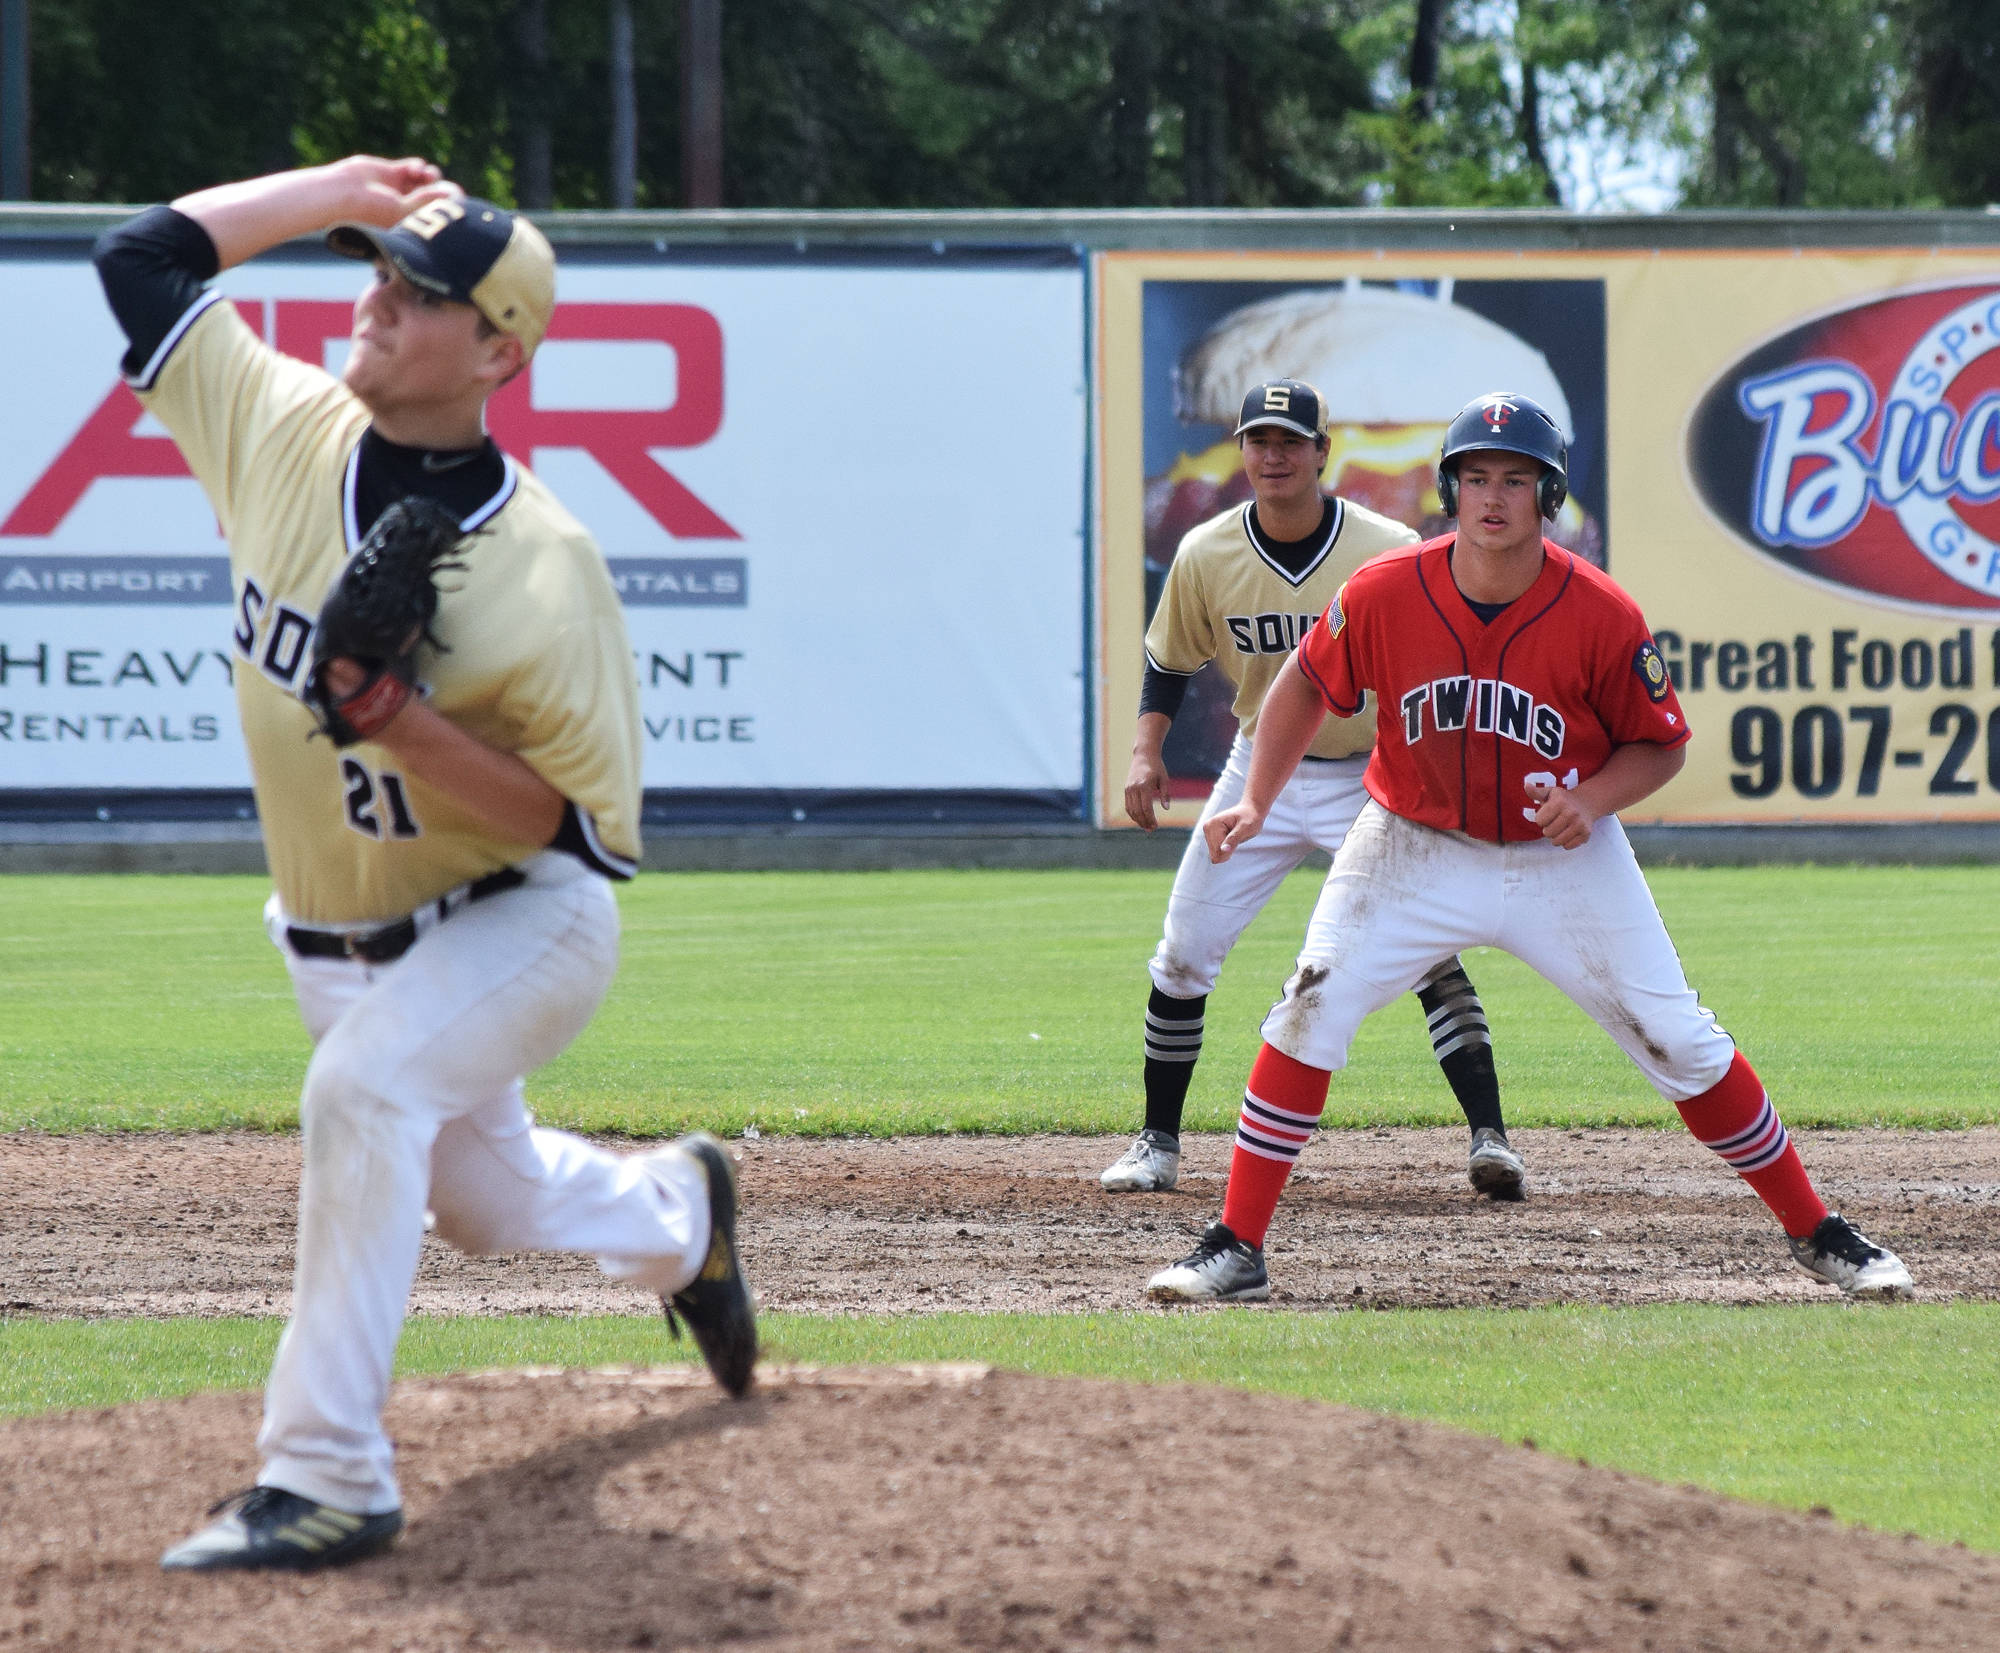 Legion Twins baserunner Andrew Carver (31) attempts a steal against South Anchorage pitcher Gunnar Nix, Wednesday afternoon at Coral Seymour Memorial Ballpark. (Photo by Joey Klecka/Peninsula Clarion)